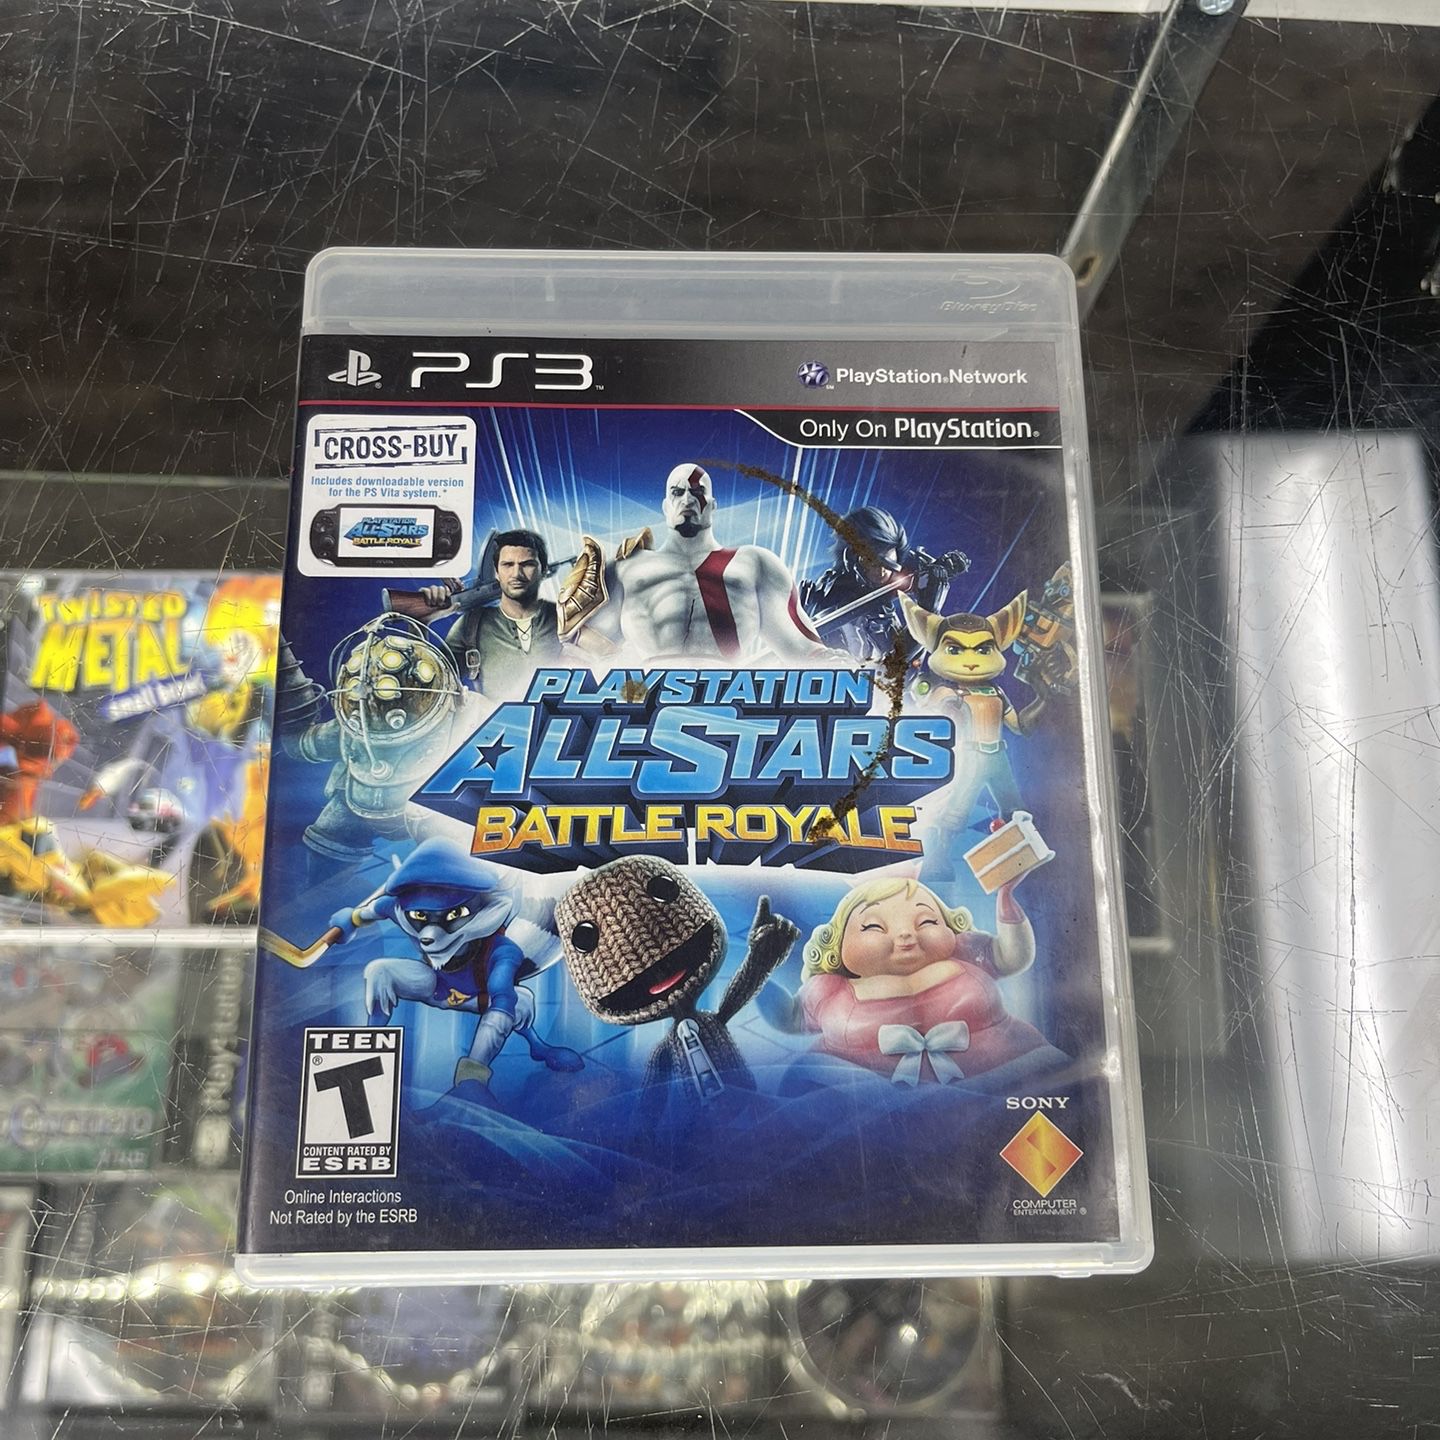 PlayStation All Stars Ps3 $20 Each Gamehogs 11am-7pm